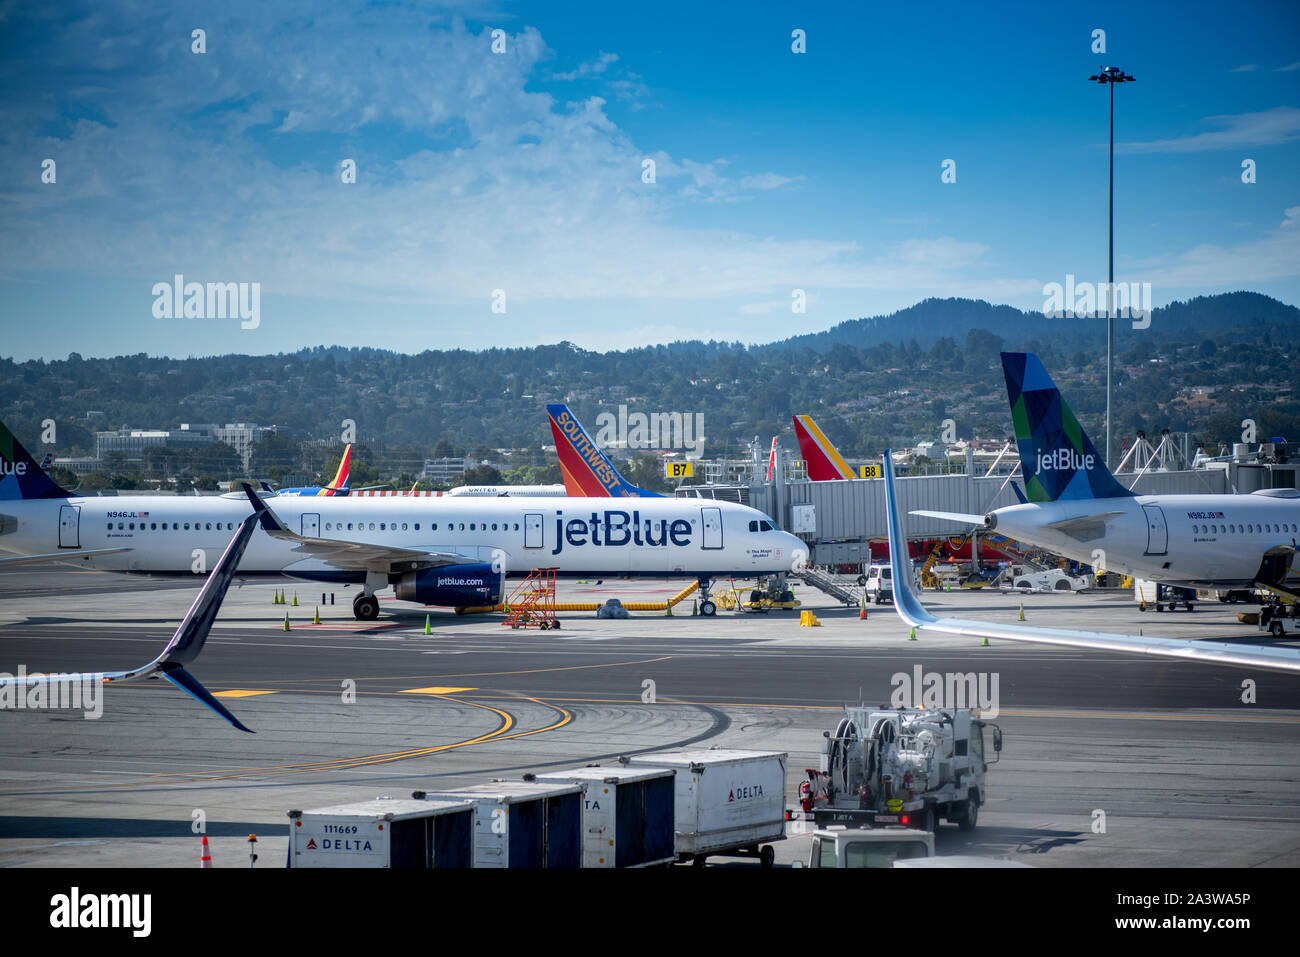 San Francisco, CA- September 4, 2019: Jet Blue airplane ready for boarding, viewed from the glass window of an airport in the Unitd States. JetBlue Ai Stock Photo